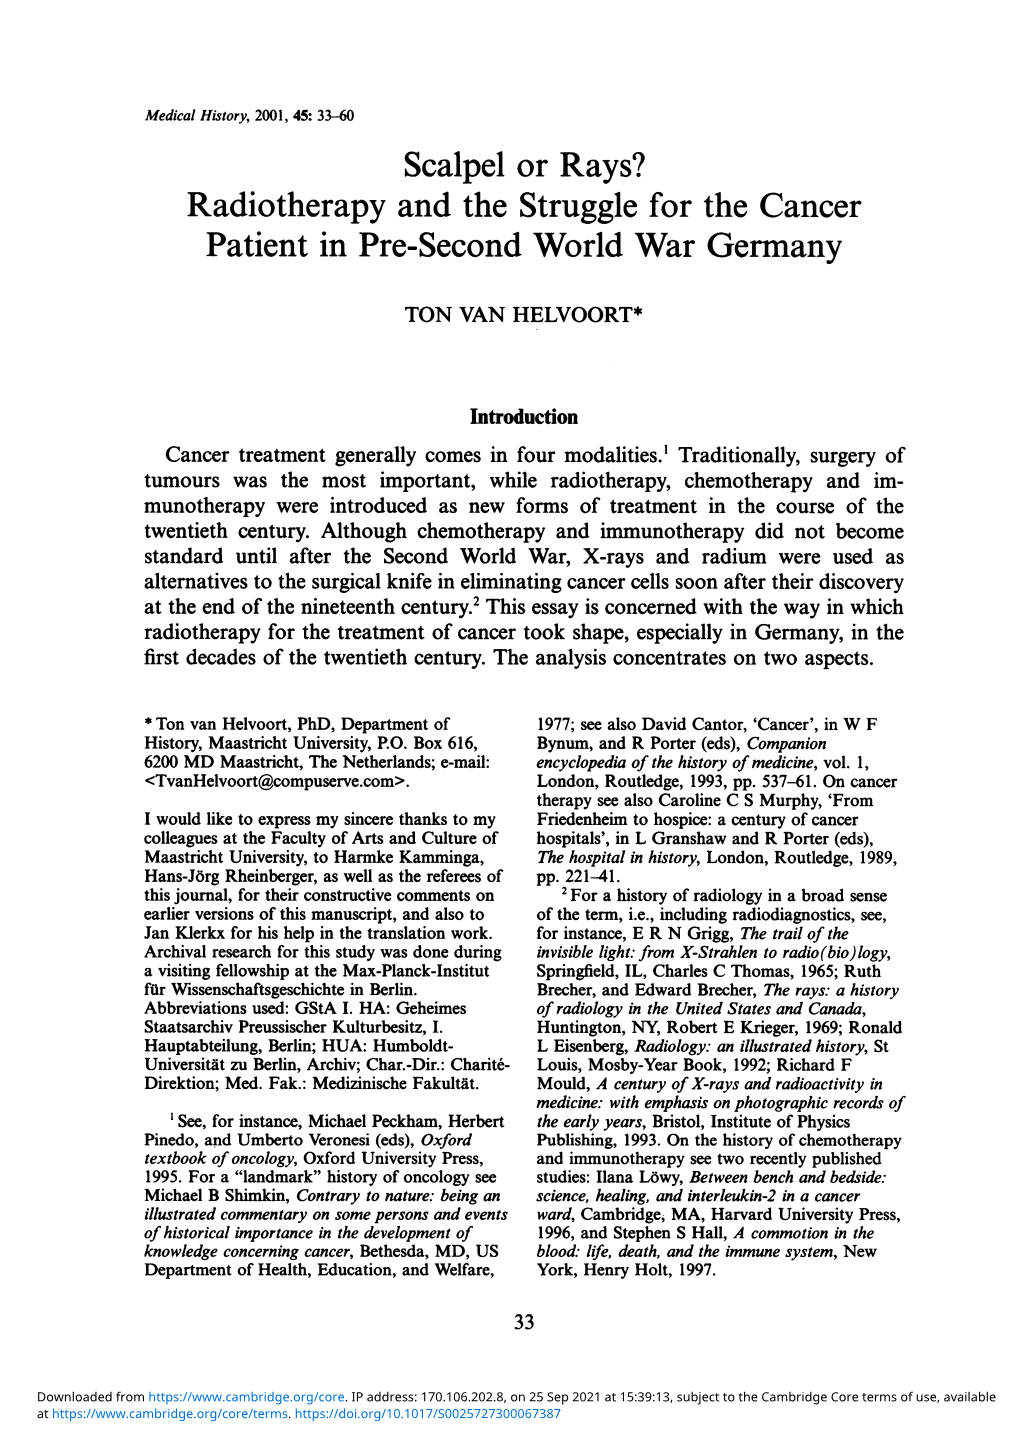 Scalpel Or Rays? Radiotherapy and the Struggle for the Cancer Patient in Pre-Second World War Germany